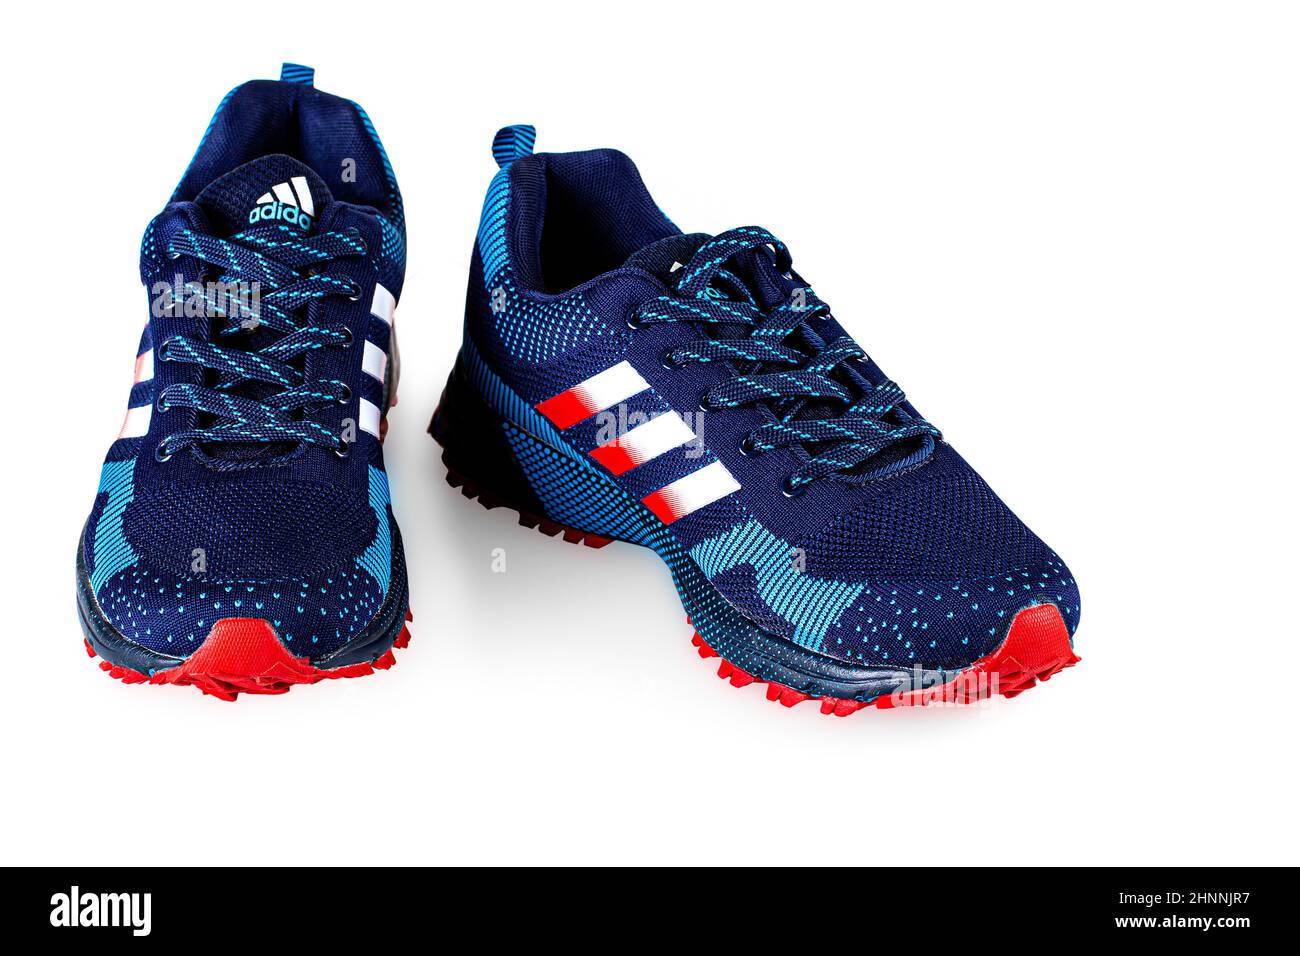 Blue Adidas Running Sneakers. Adidas, Germany company. Isolated on white. Stock Photo